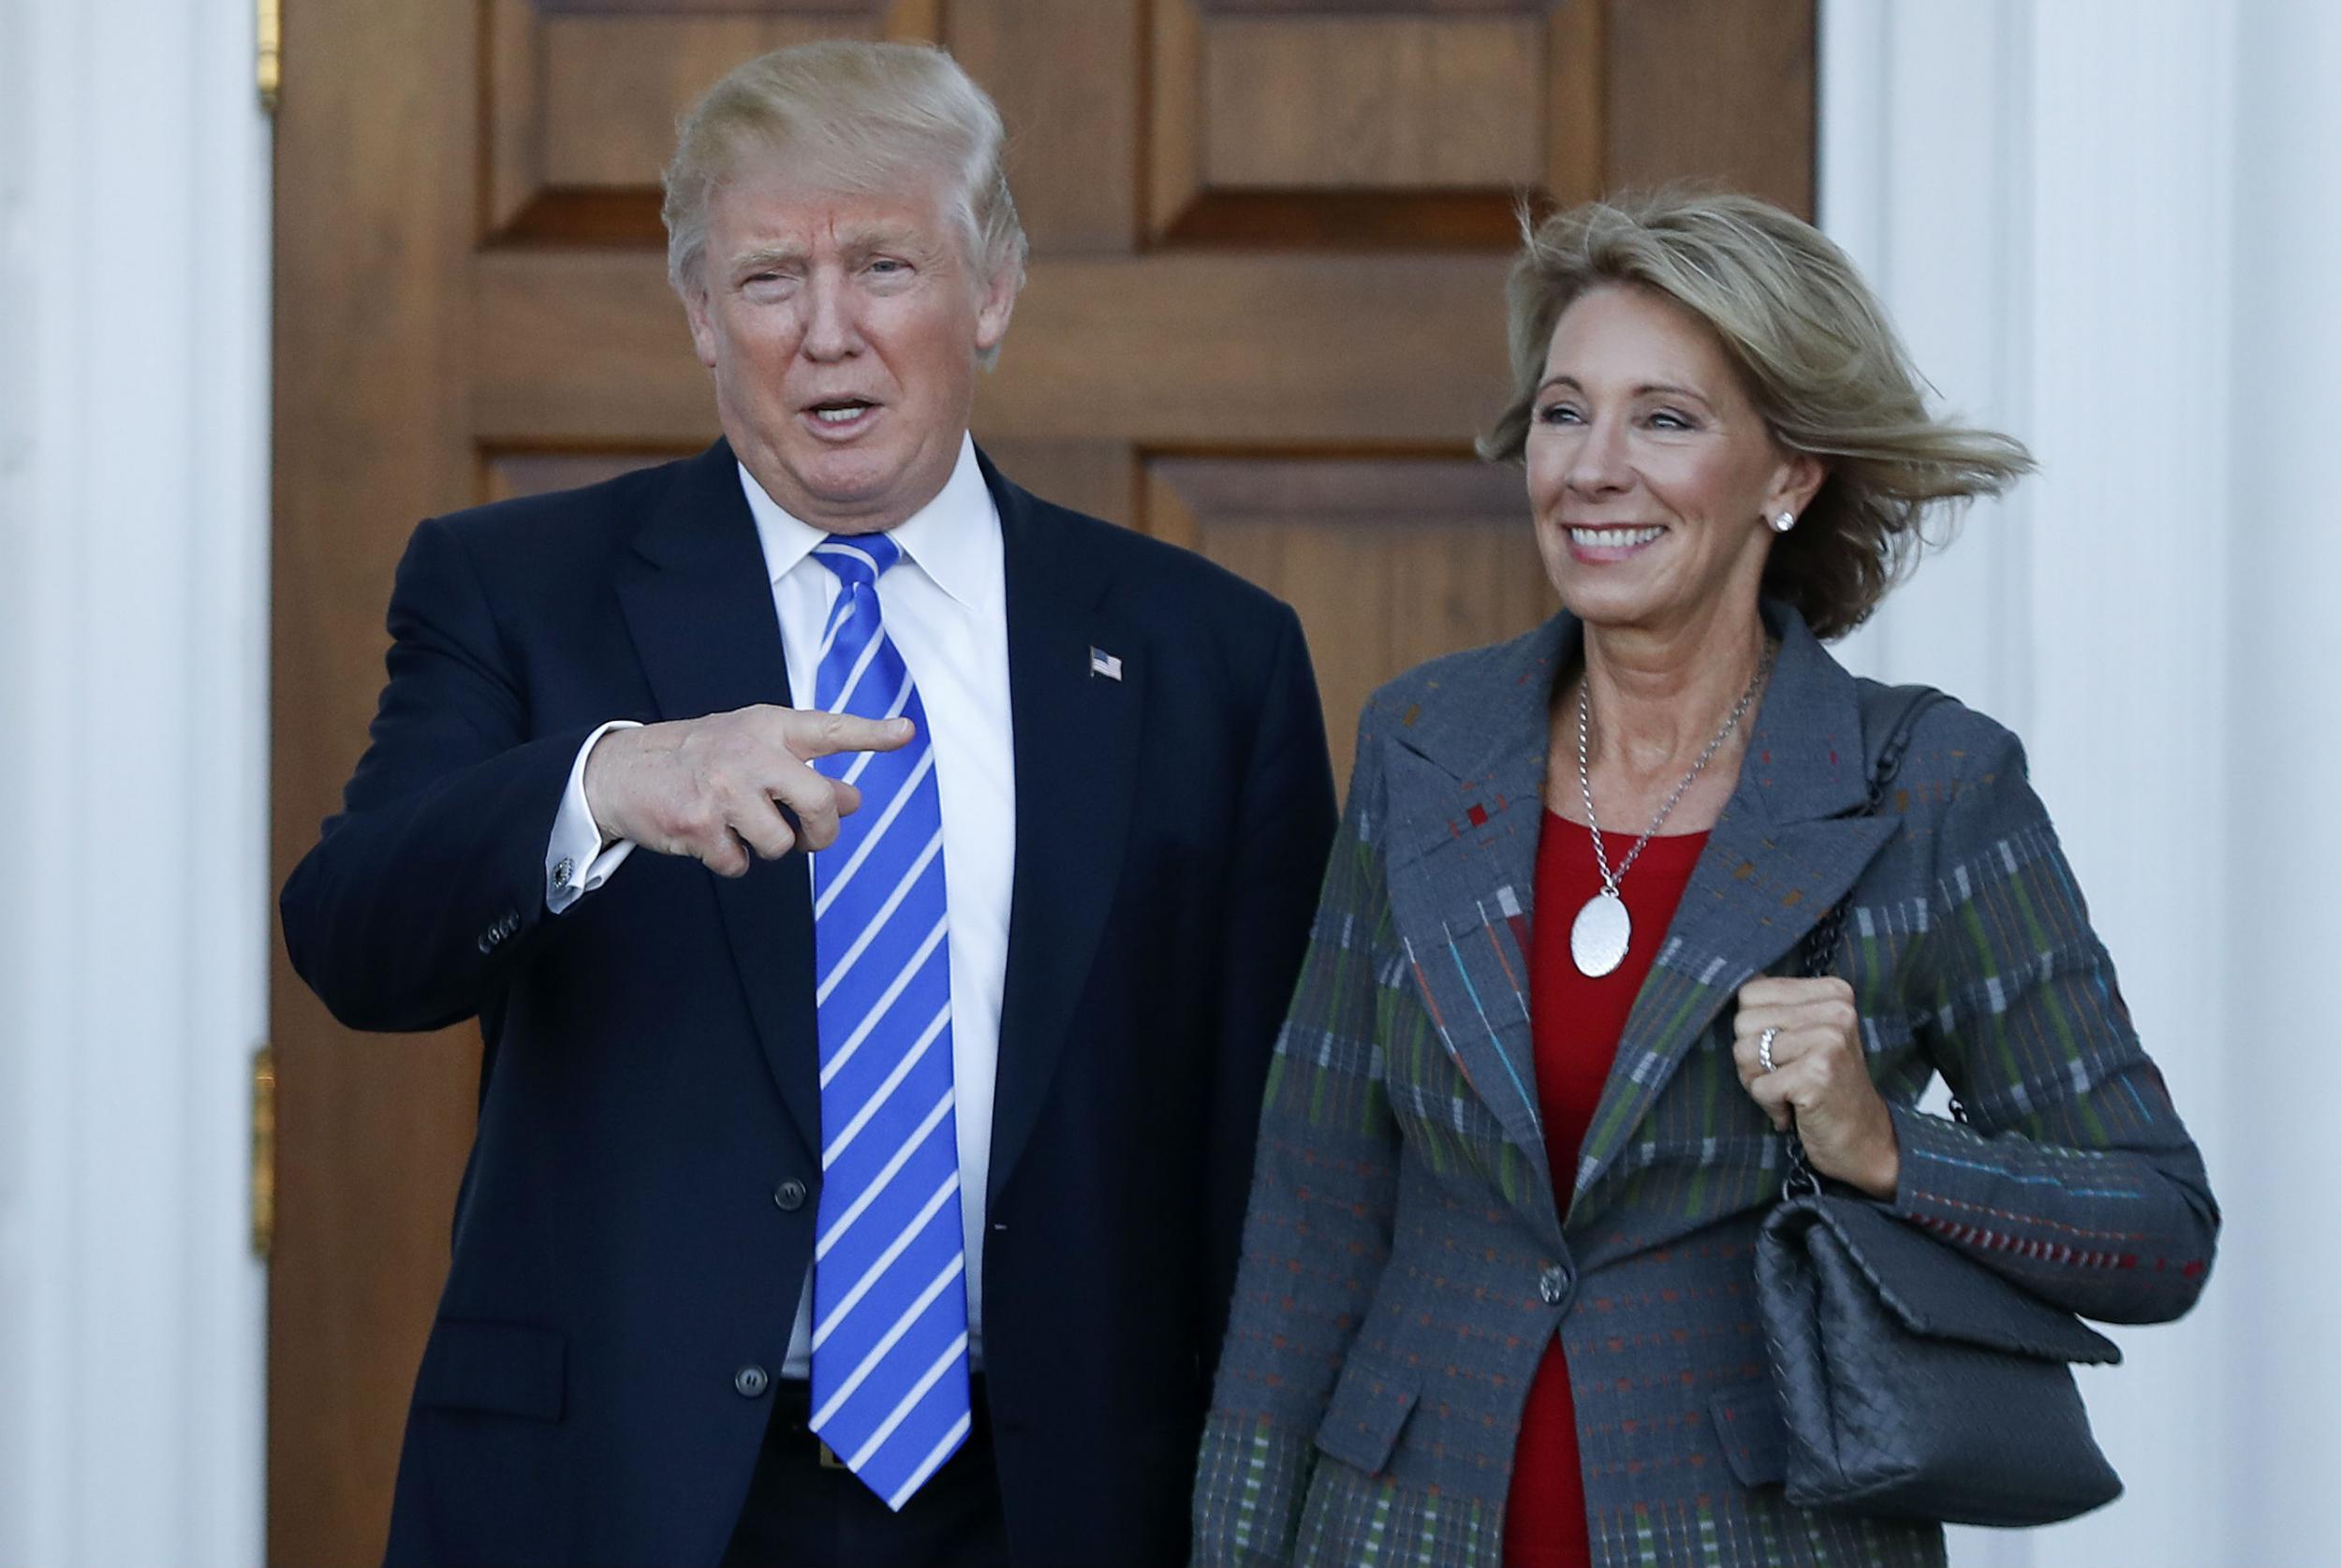 Ms DeVos used the headquarters of her advocacy group to funnel payments to other states